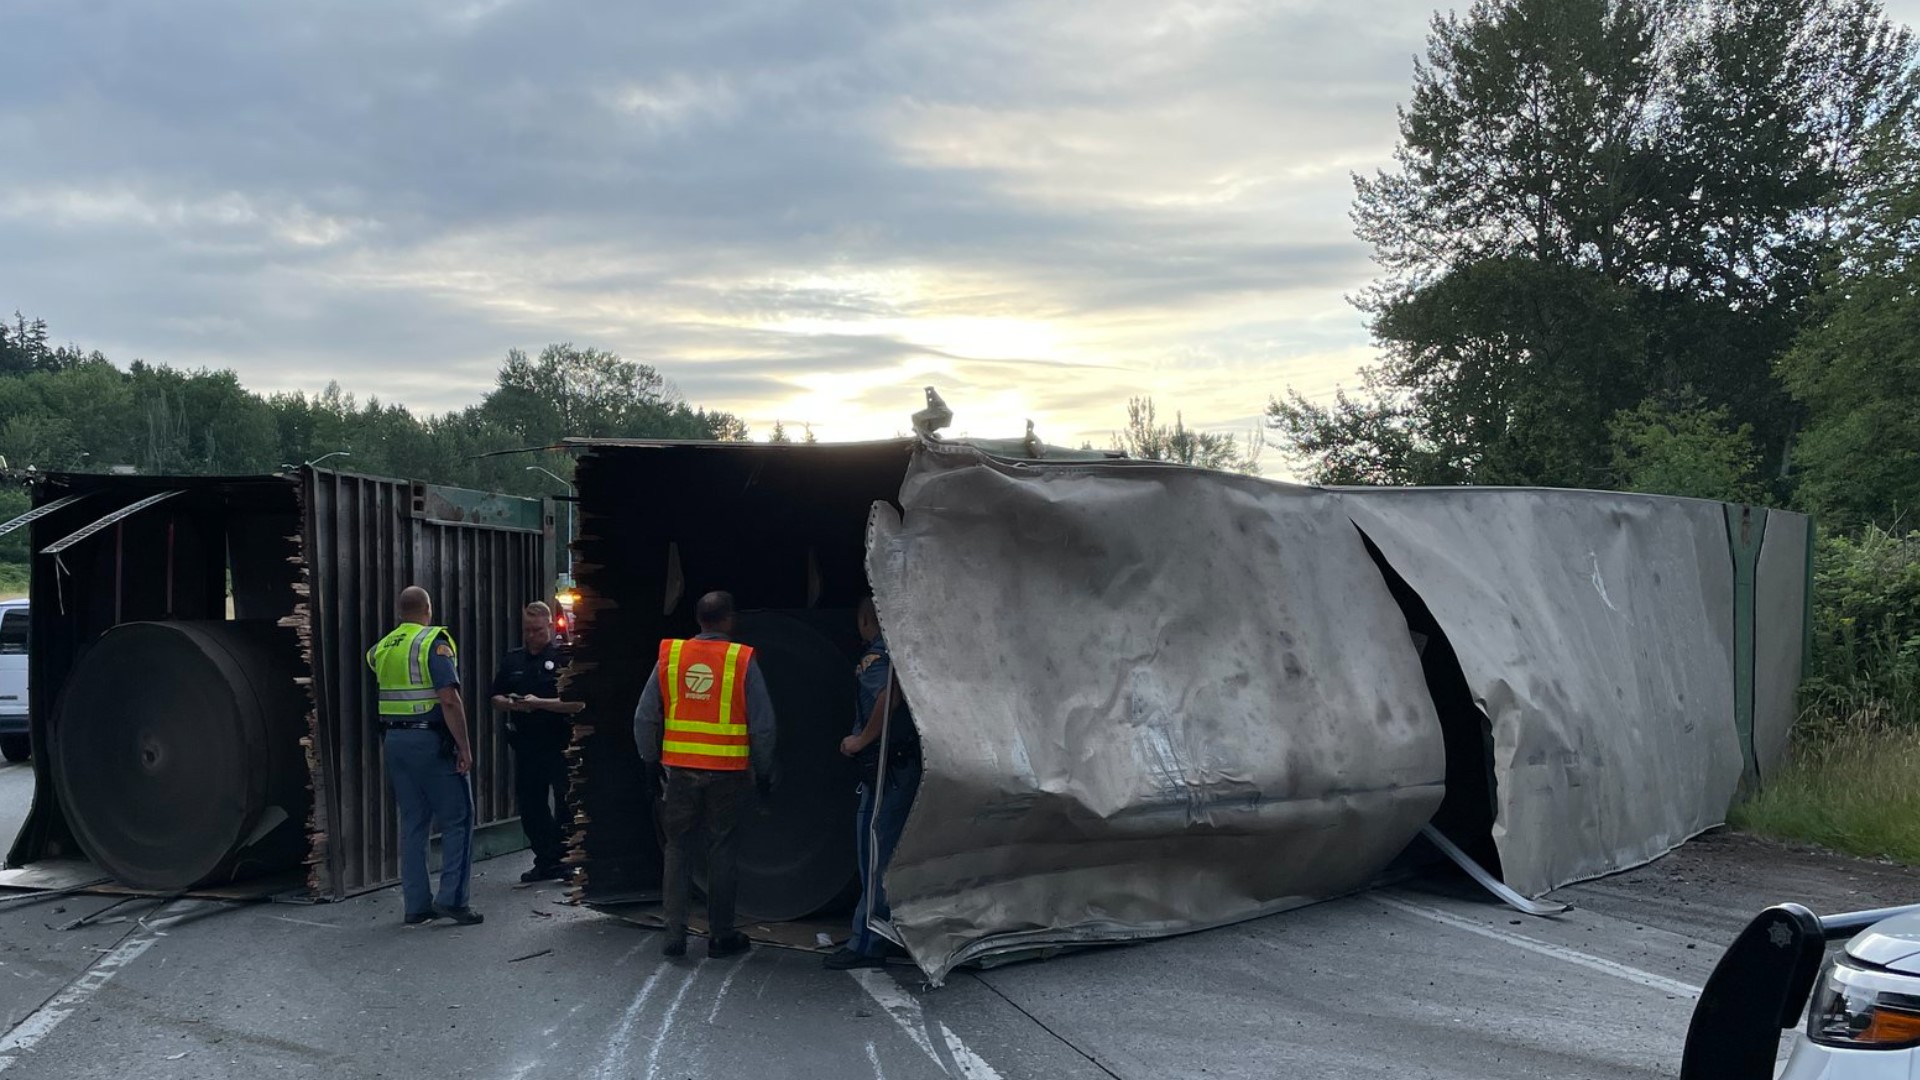 A semi-truck rolled over on northbound Interstate 405 in Tukwila Wednesday morning, causing several lane closures and delays in the Southcenter area.